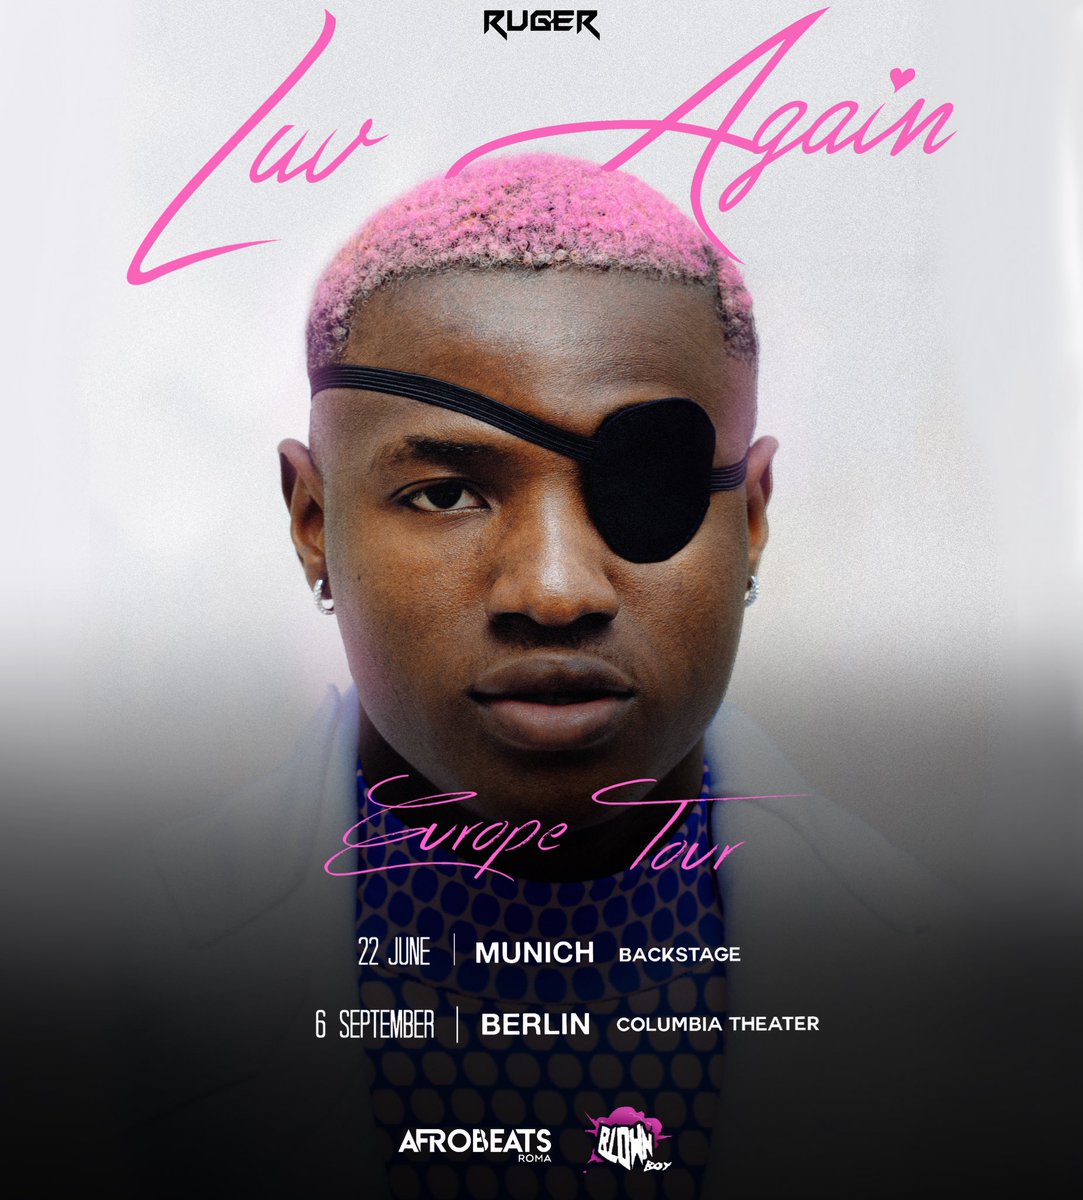 GERMANY 🇩🇪!!!! I didn’t forget you. We have two new dates!!! 22nd June in MUNICH and 6th September in BERLIN. I love you and I hope to see you 🥹❤️. rugereurope.afrobeatsroma.live